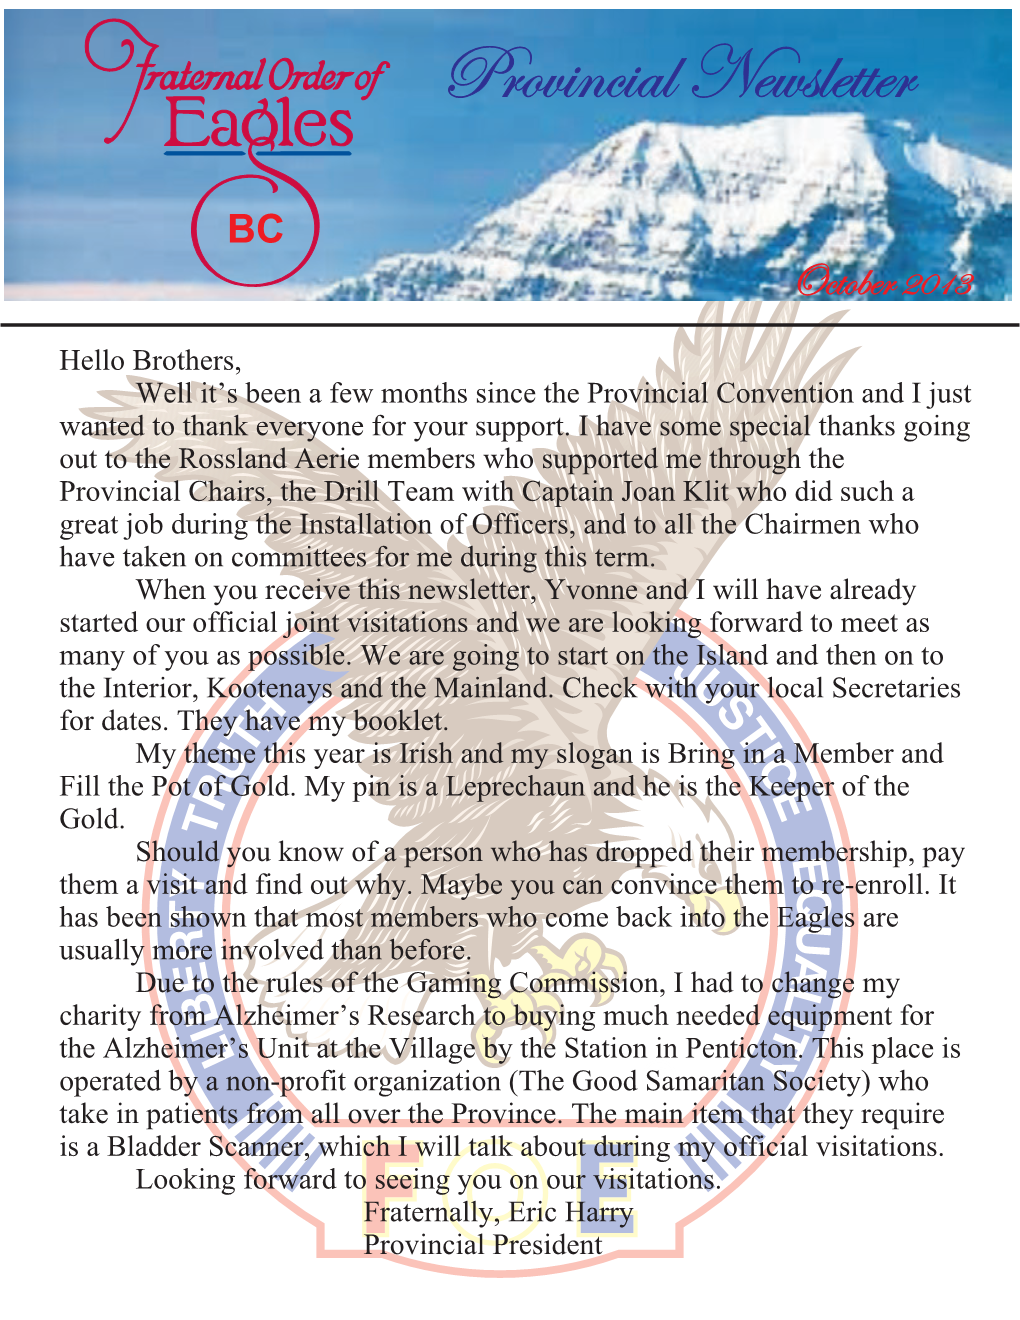 BC PROVINCIAL NEWSLETTER.Cdr